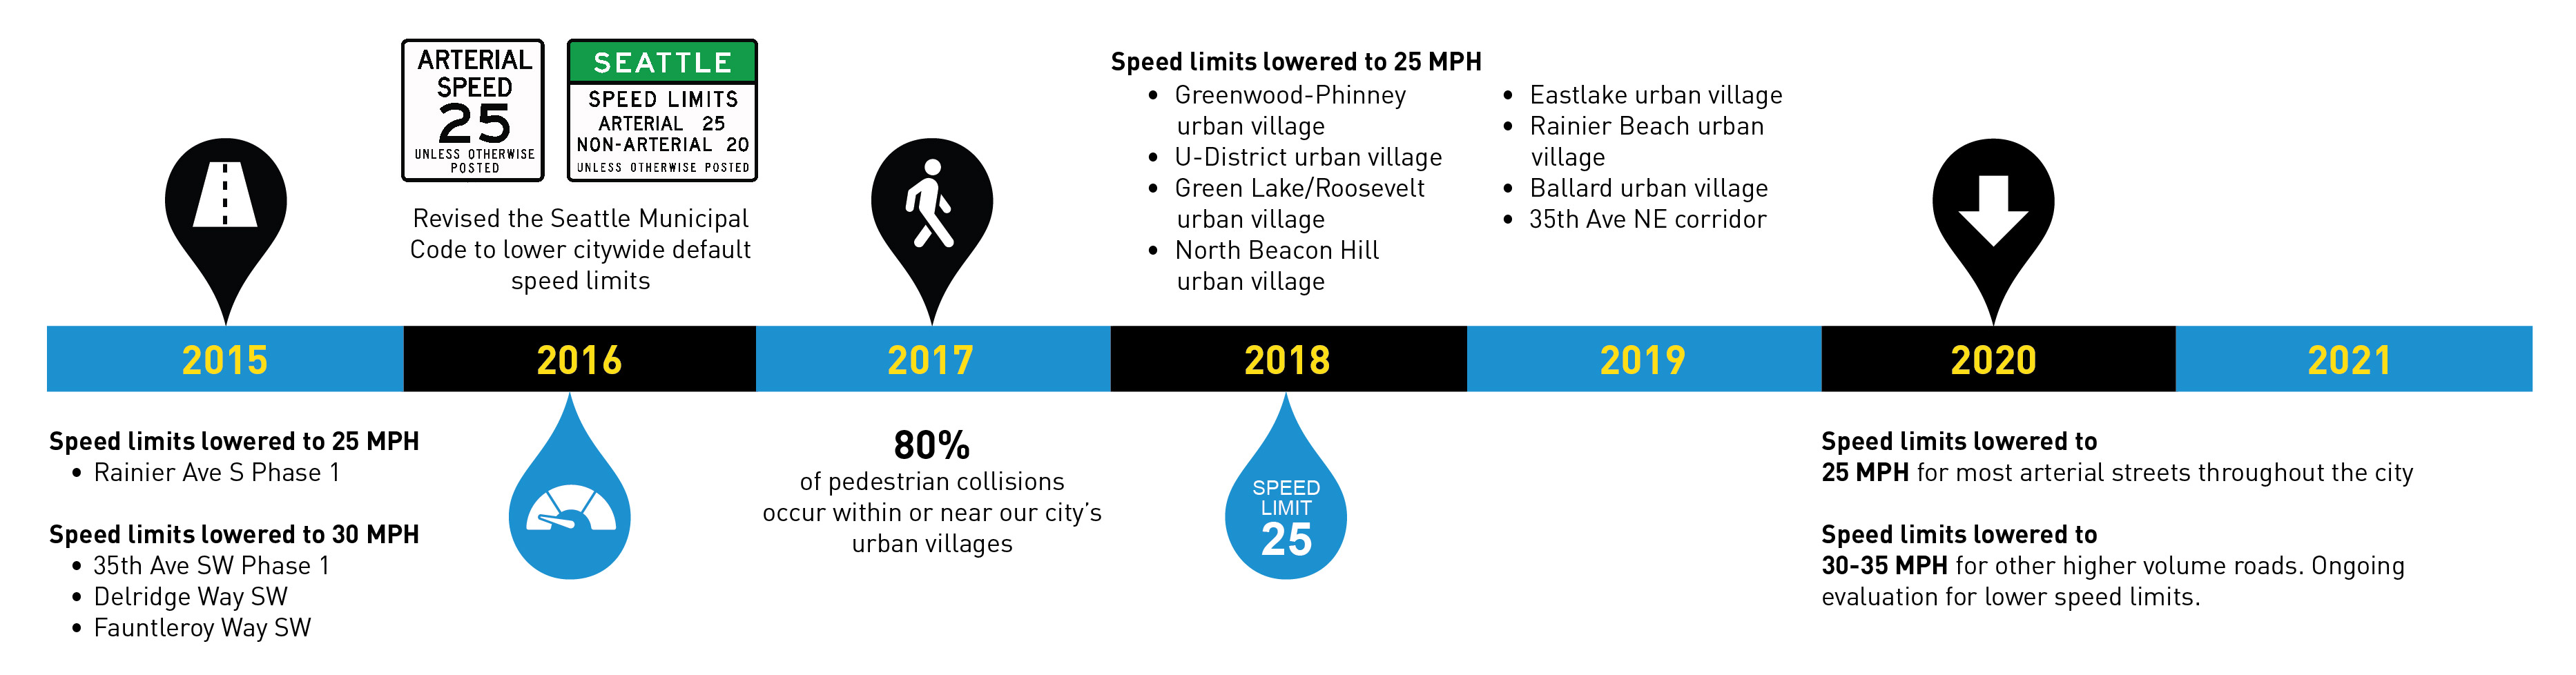 A timeline illustrating the speed limit changes shared in text above